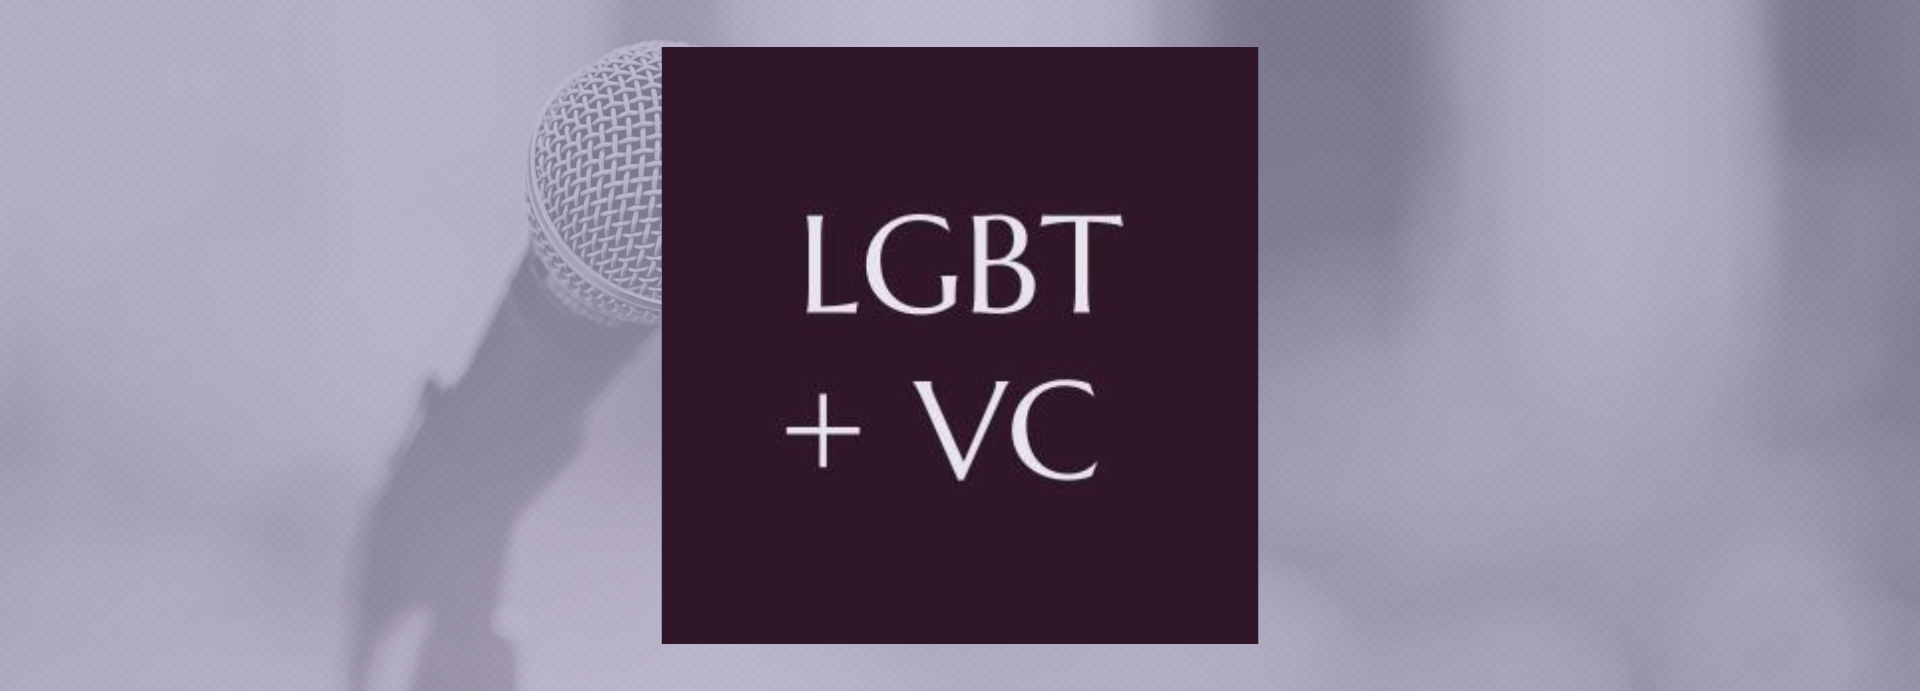 LGBT+ VC Aims To Grow Investment & Opportunity